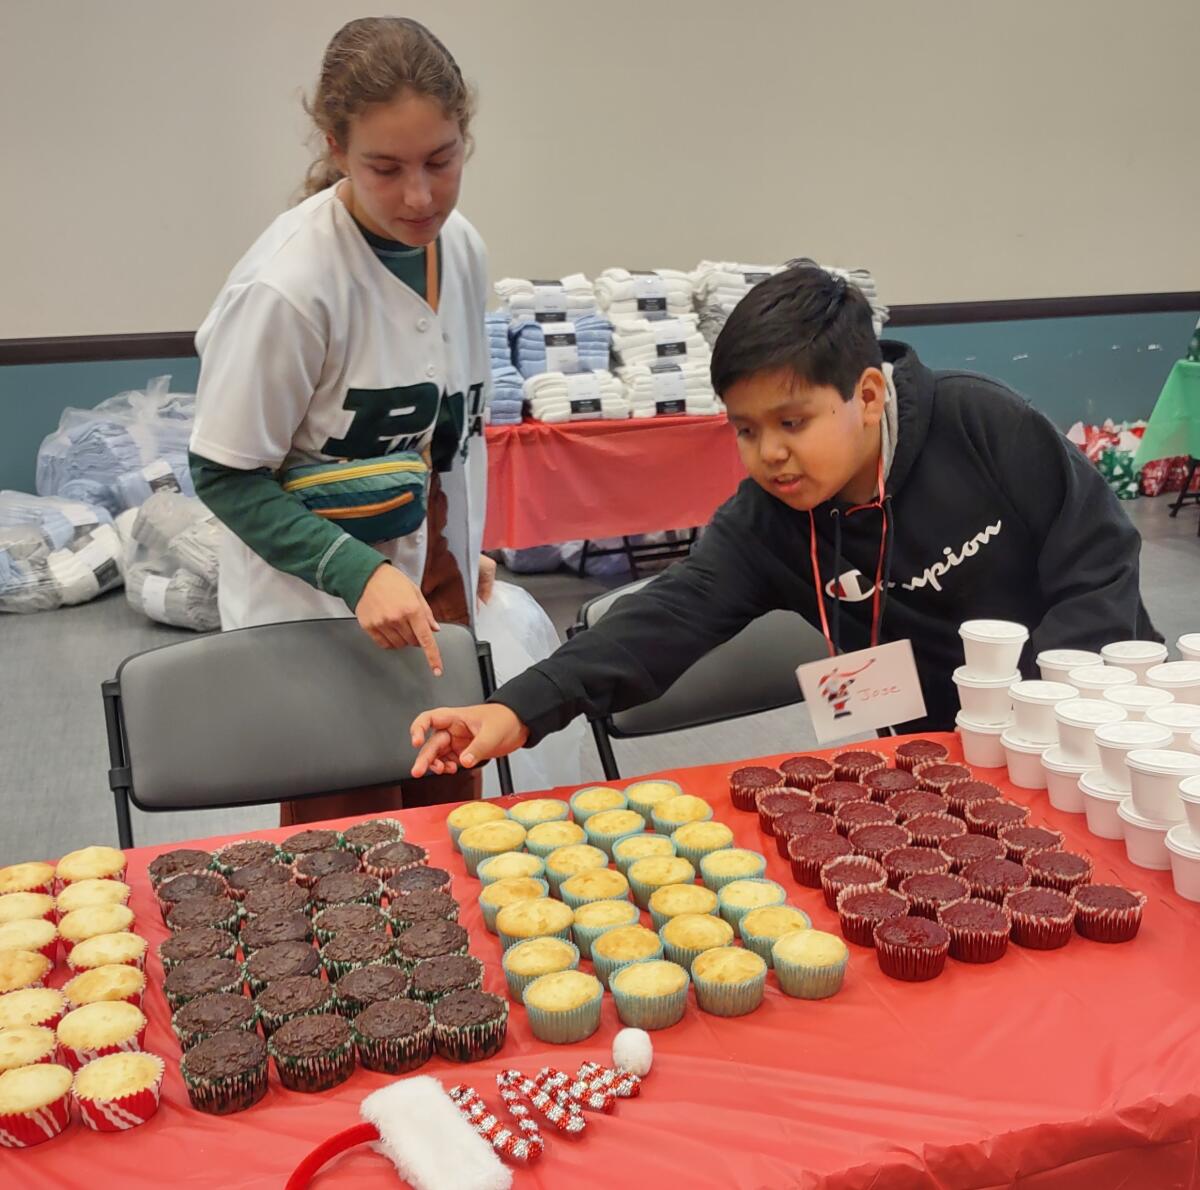 Jose Martinez reaches for a cupcake to decorate with the help of Anjolie Norton.